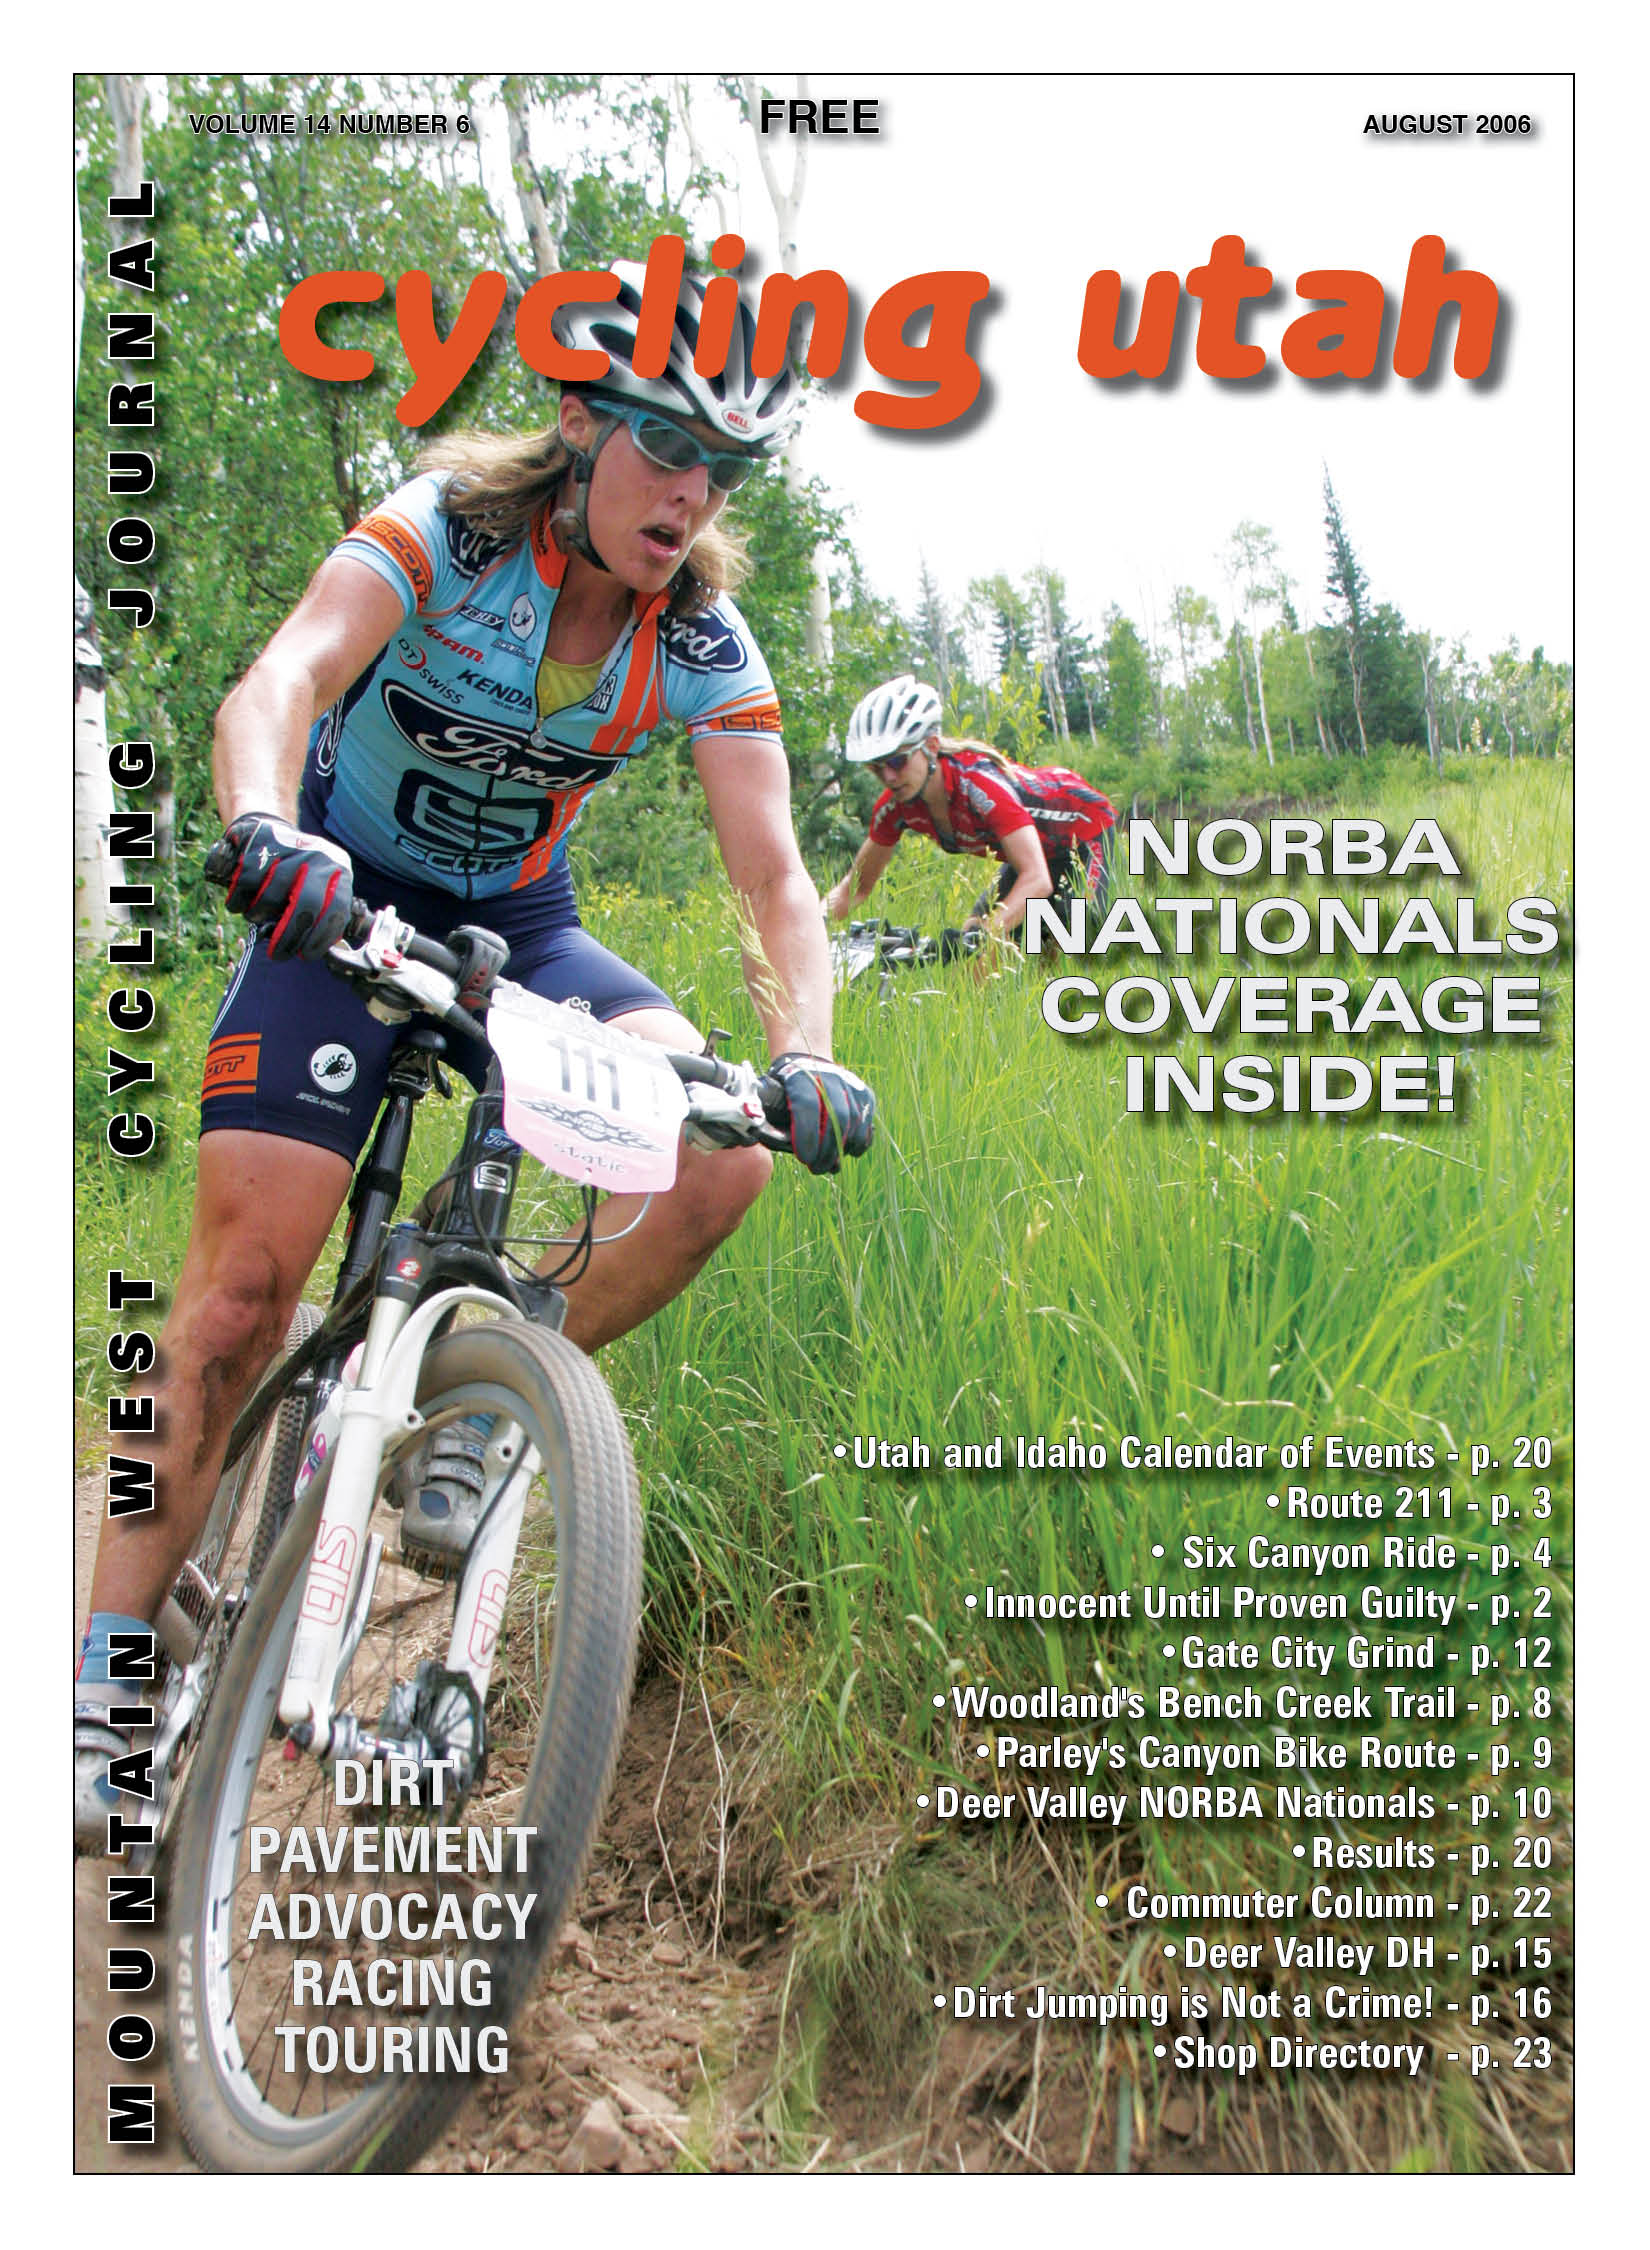 Cycling Utah’s August 2006 Issue is Now Available!